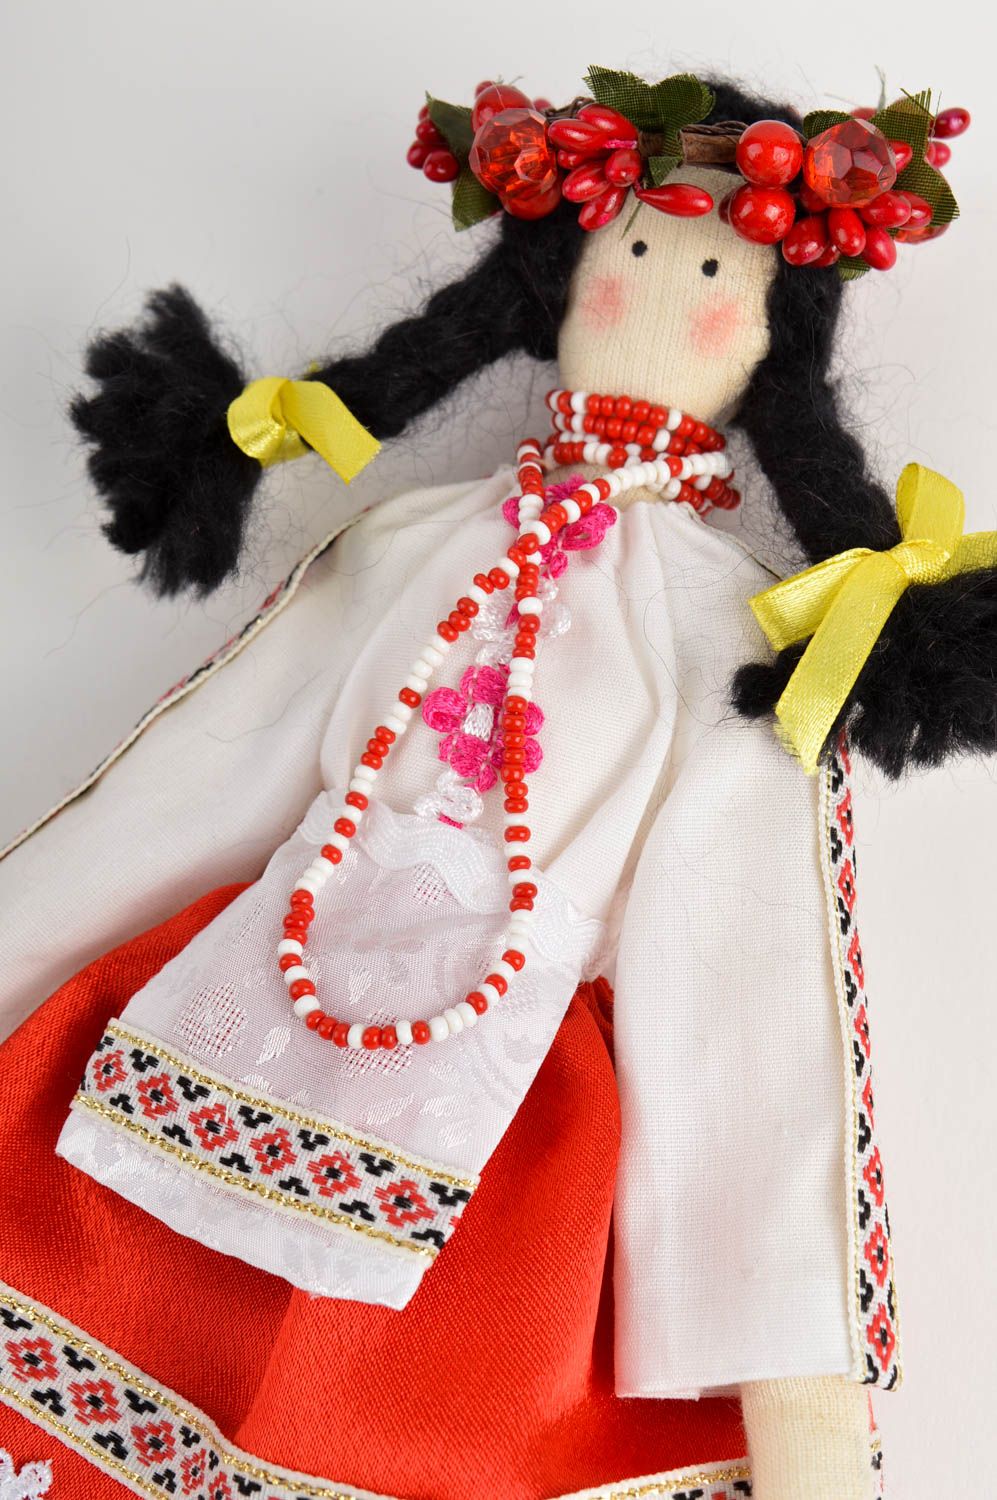 Handmade doll toy in national costume designer childrens toy decoration ideas photo 3